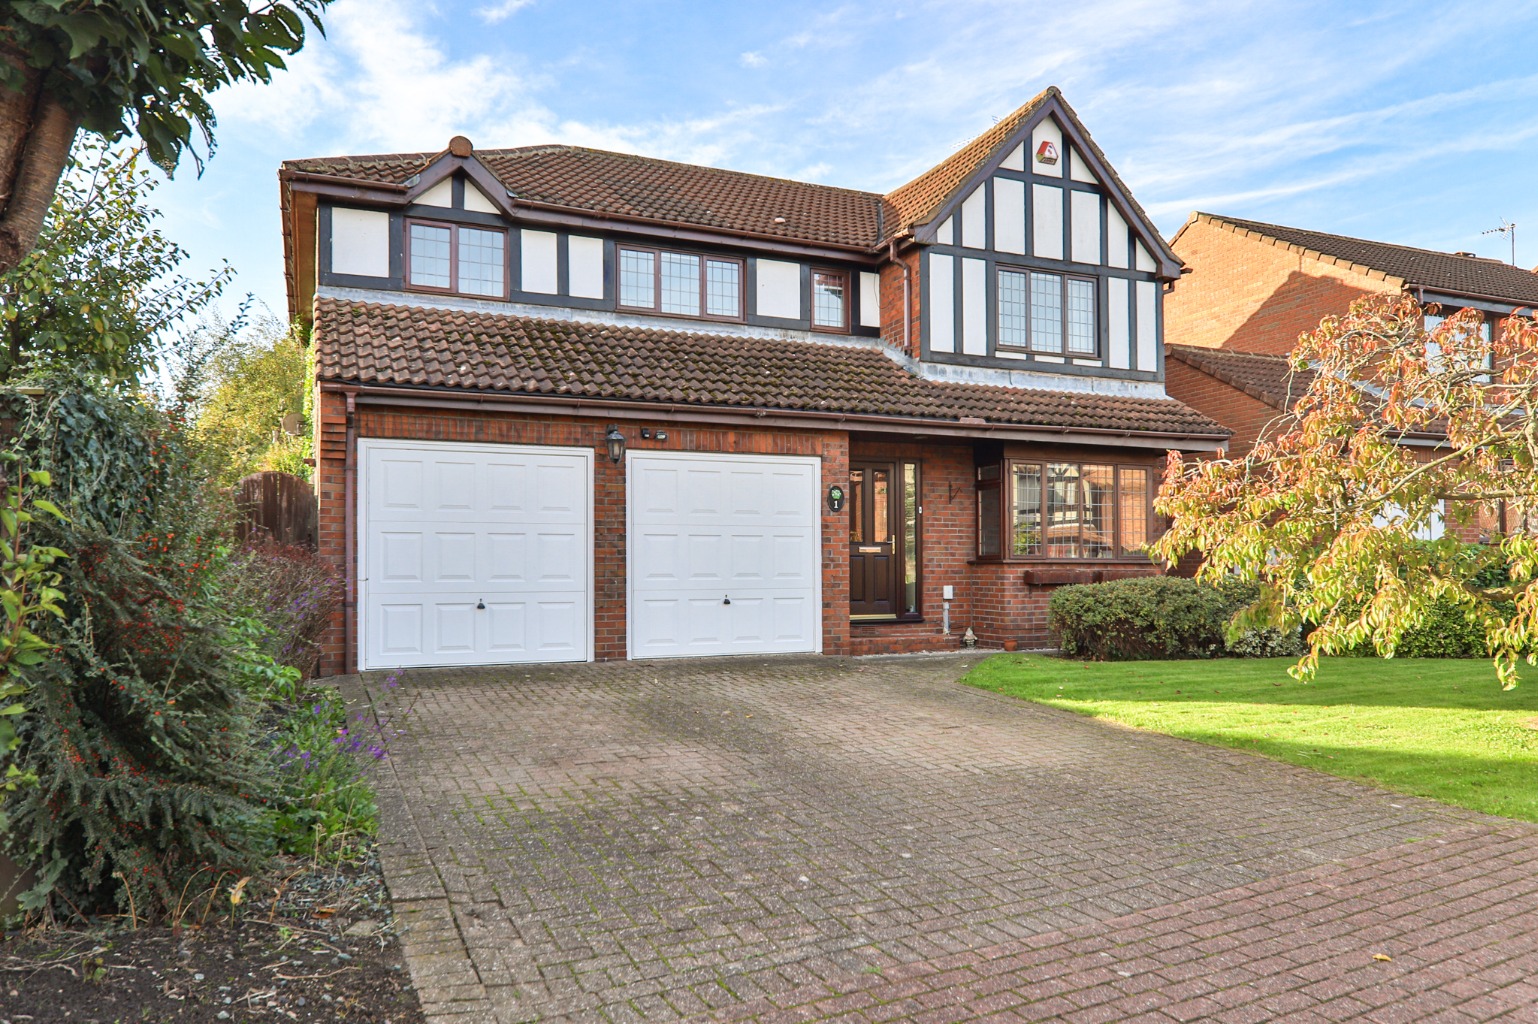 5 bed detached house for sale  - Property Image 1